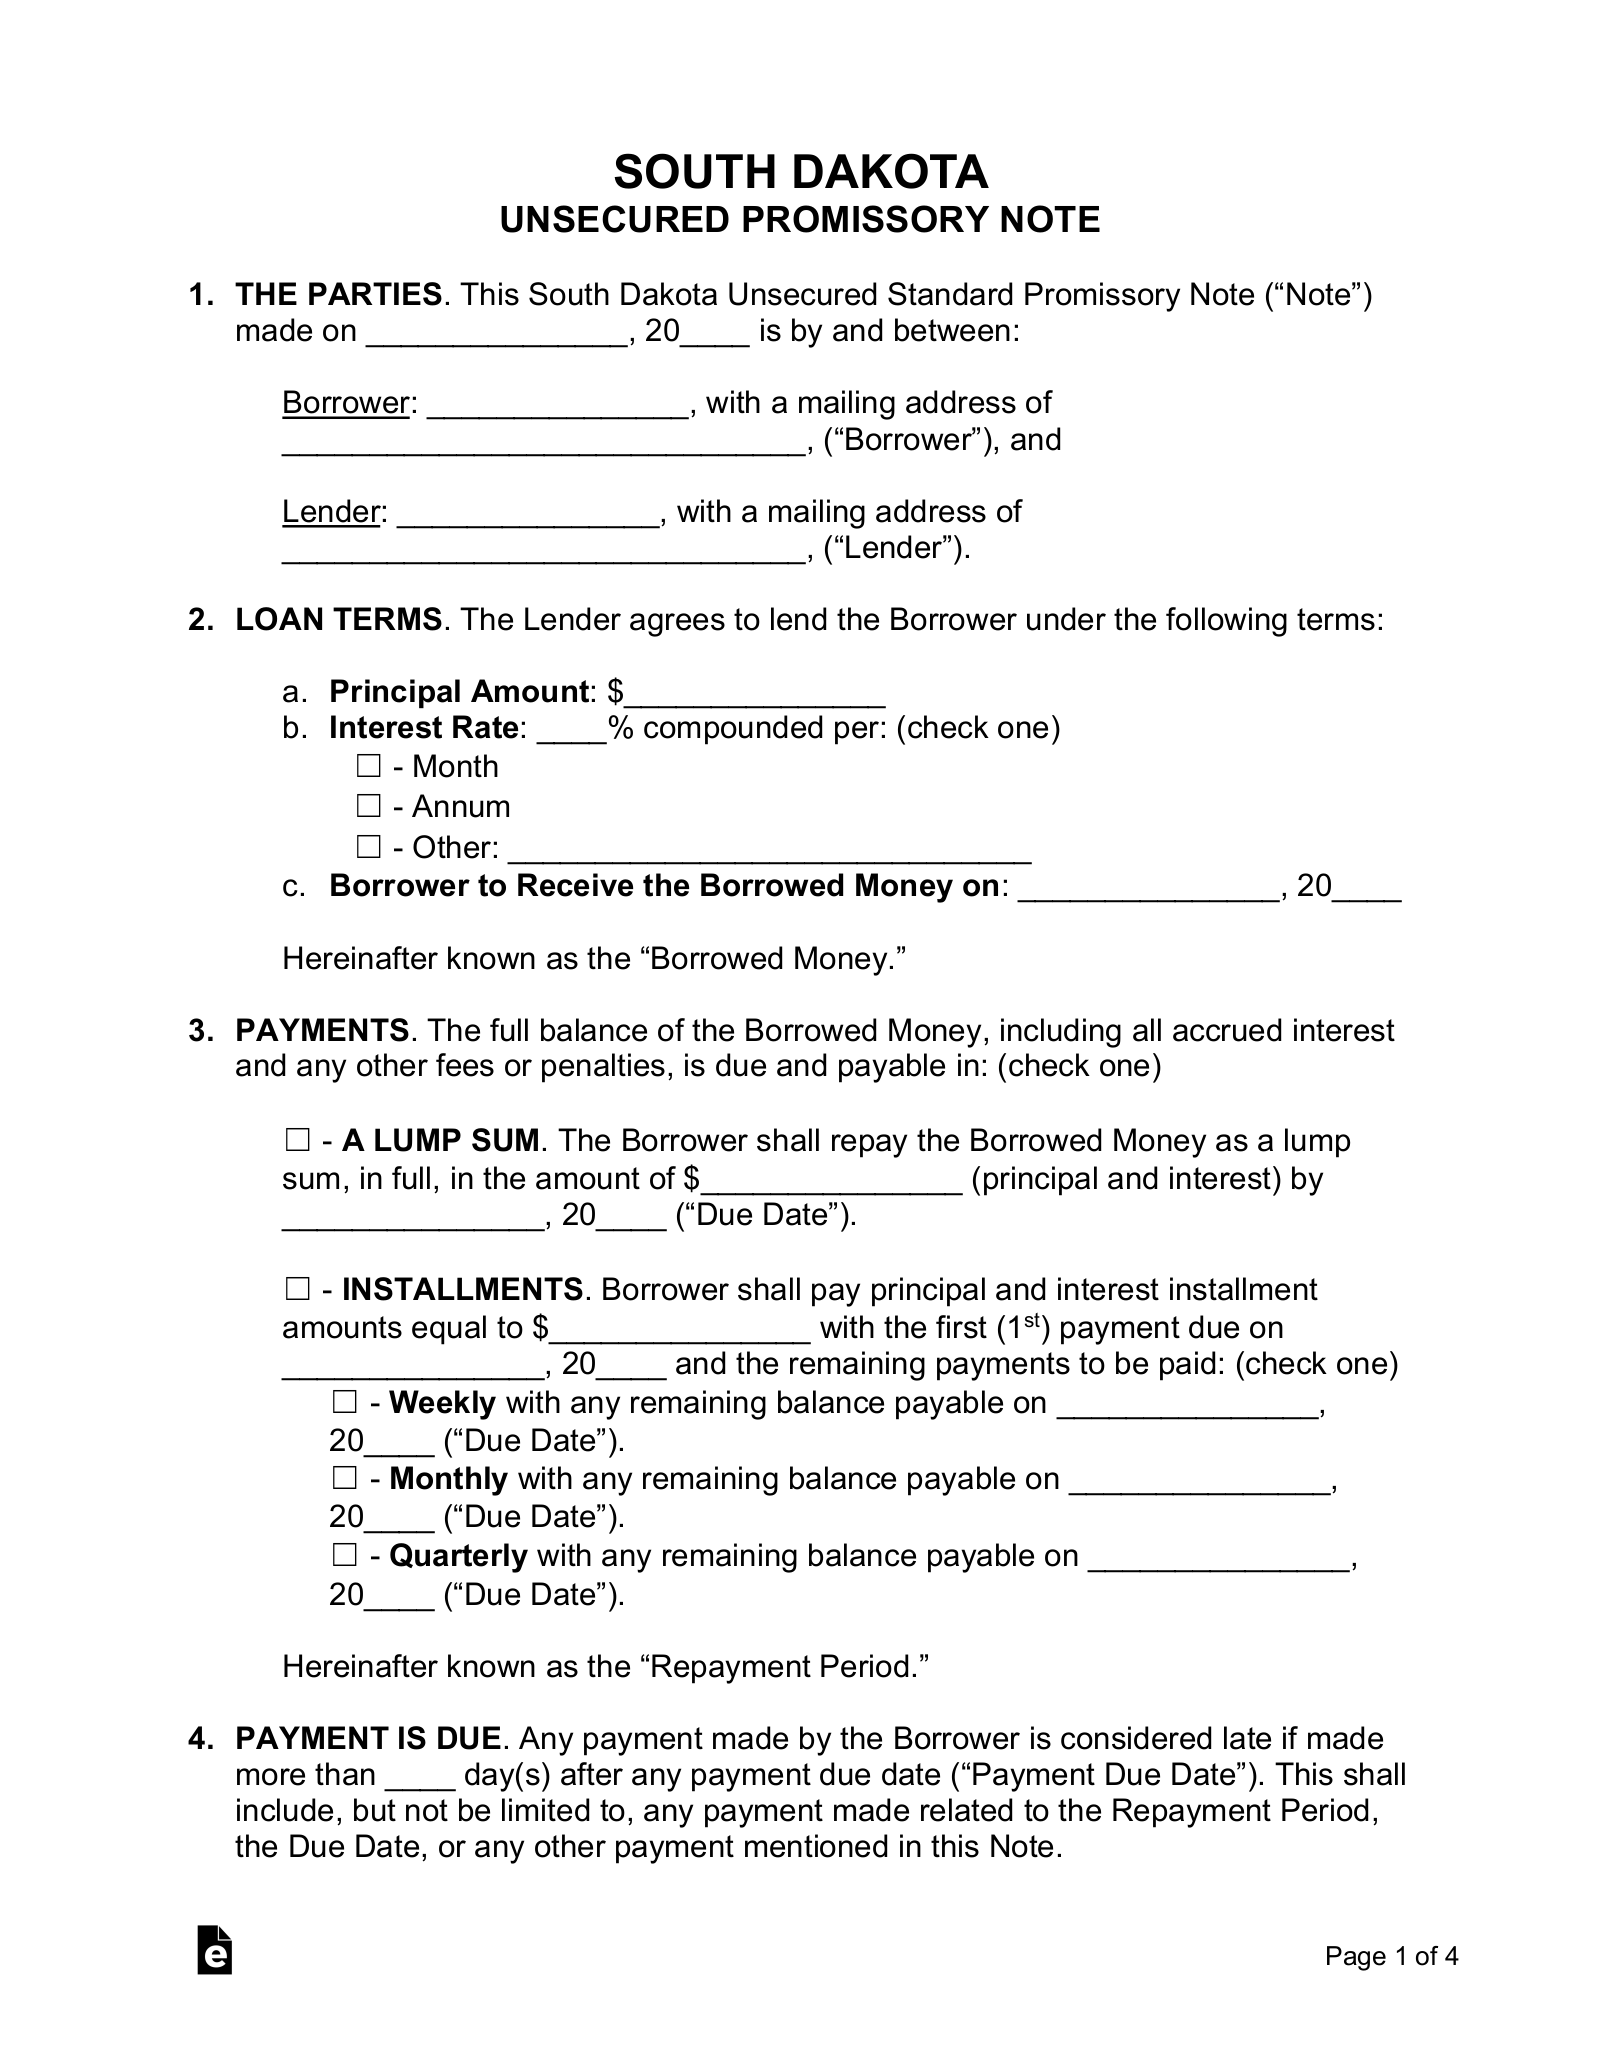 South Dakota Unsecured Promissory Note Template